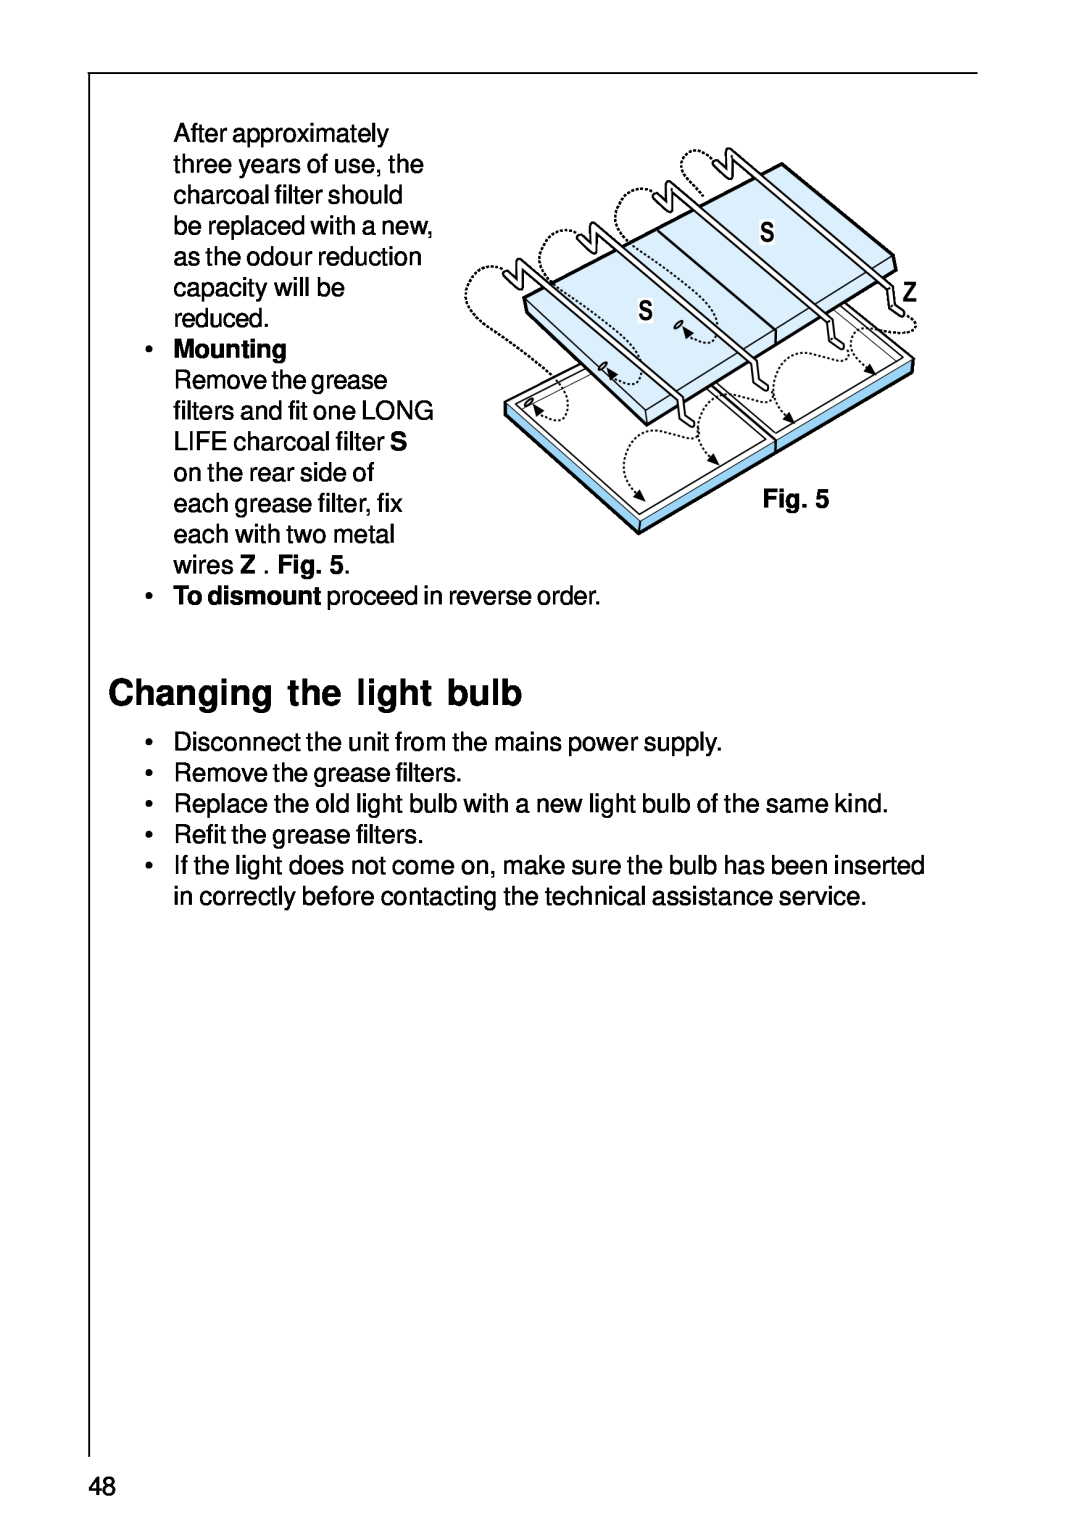 AEG 1400 D installation instructions Changing the light bulb, Mounting 